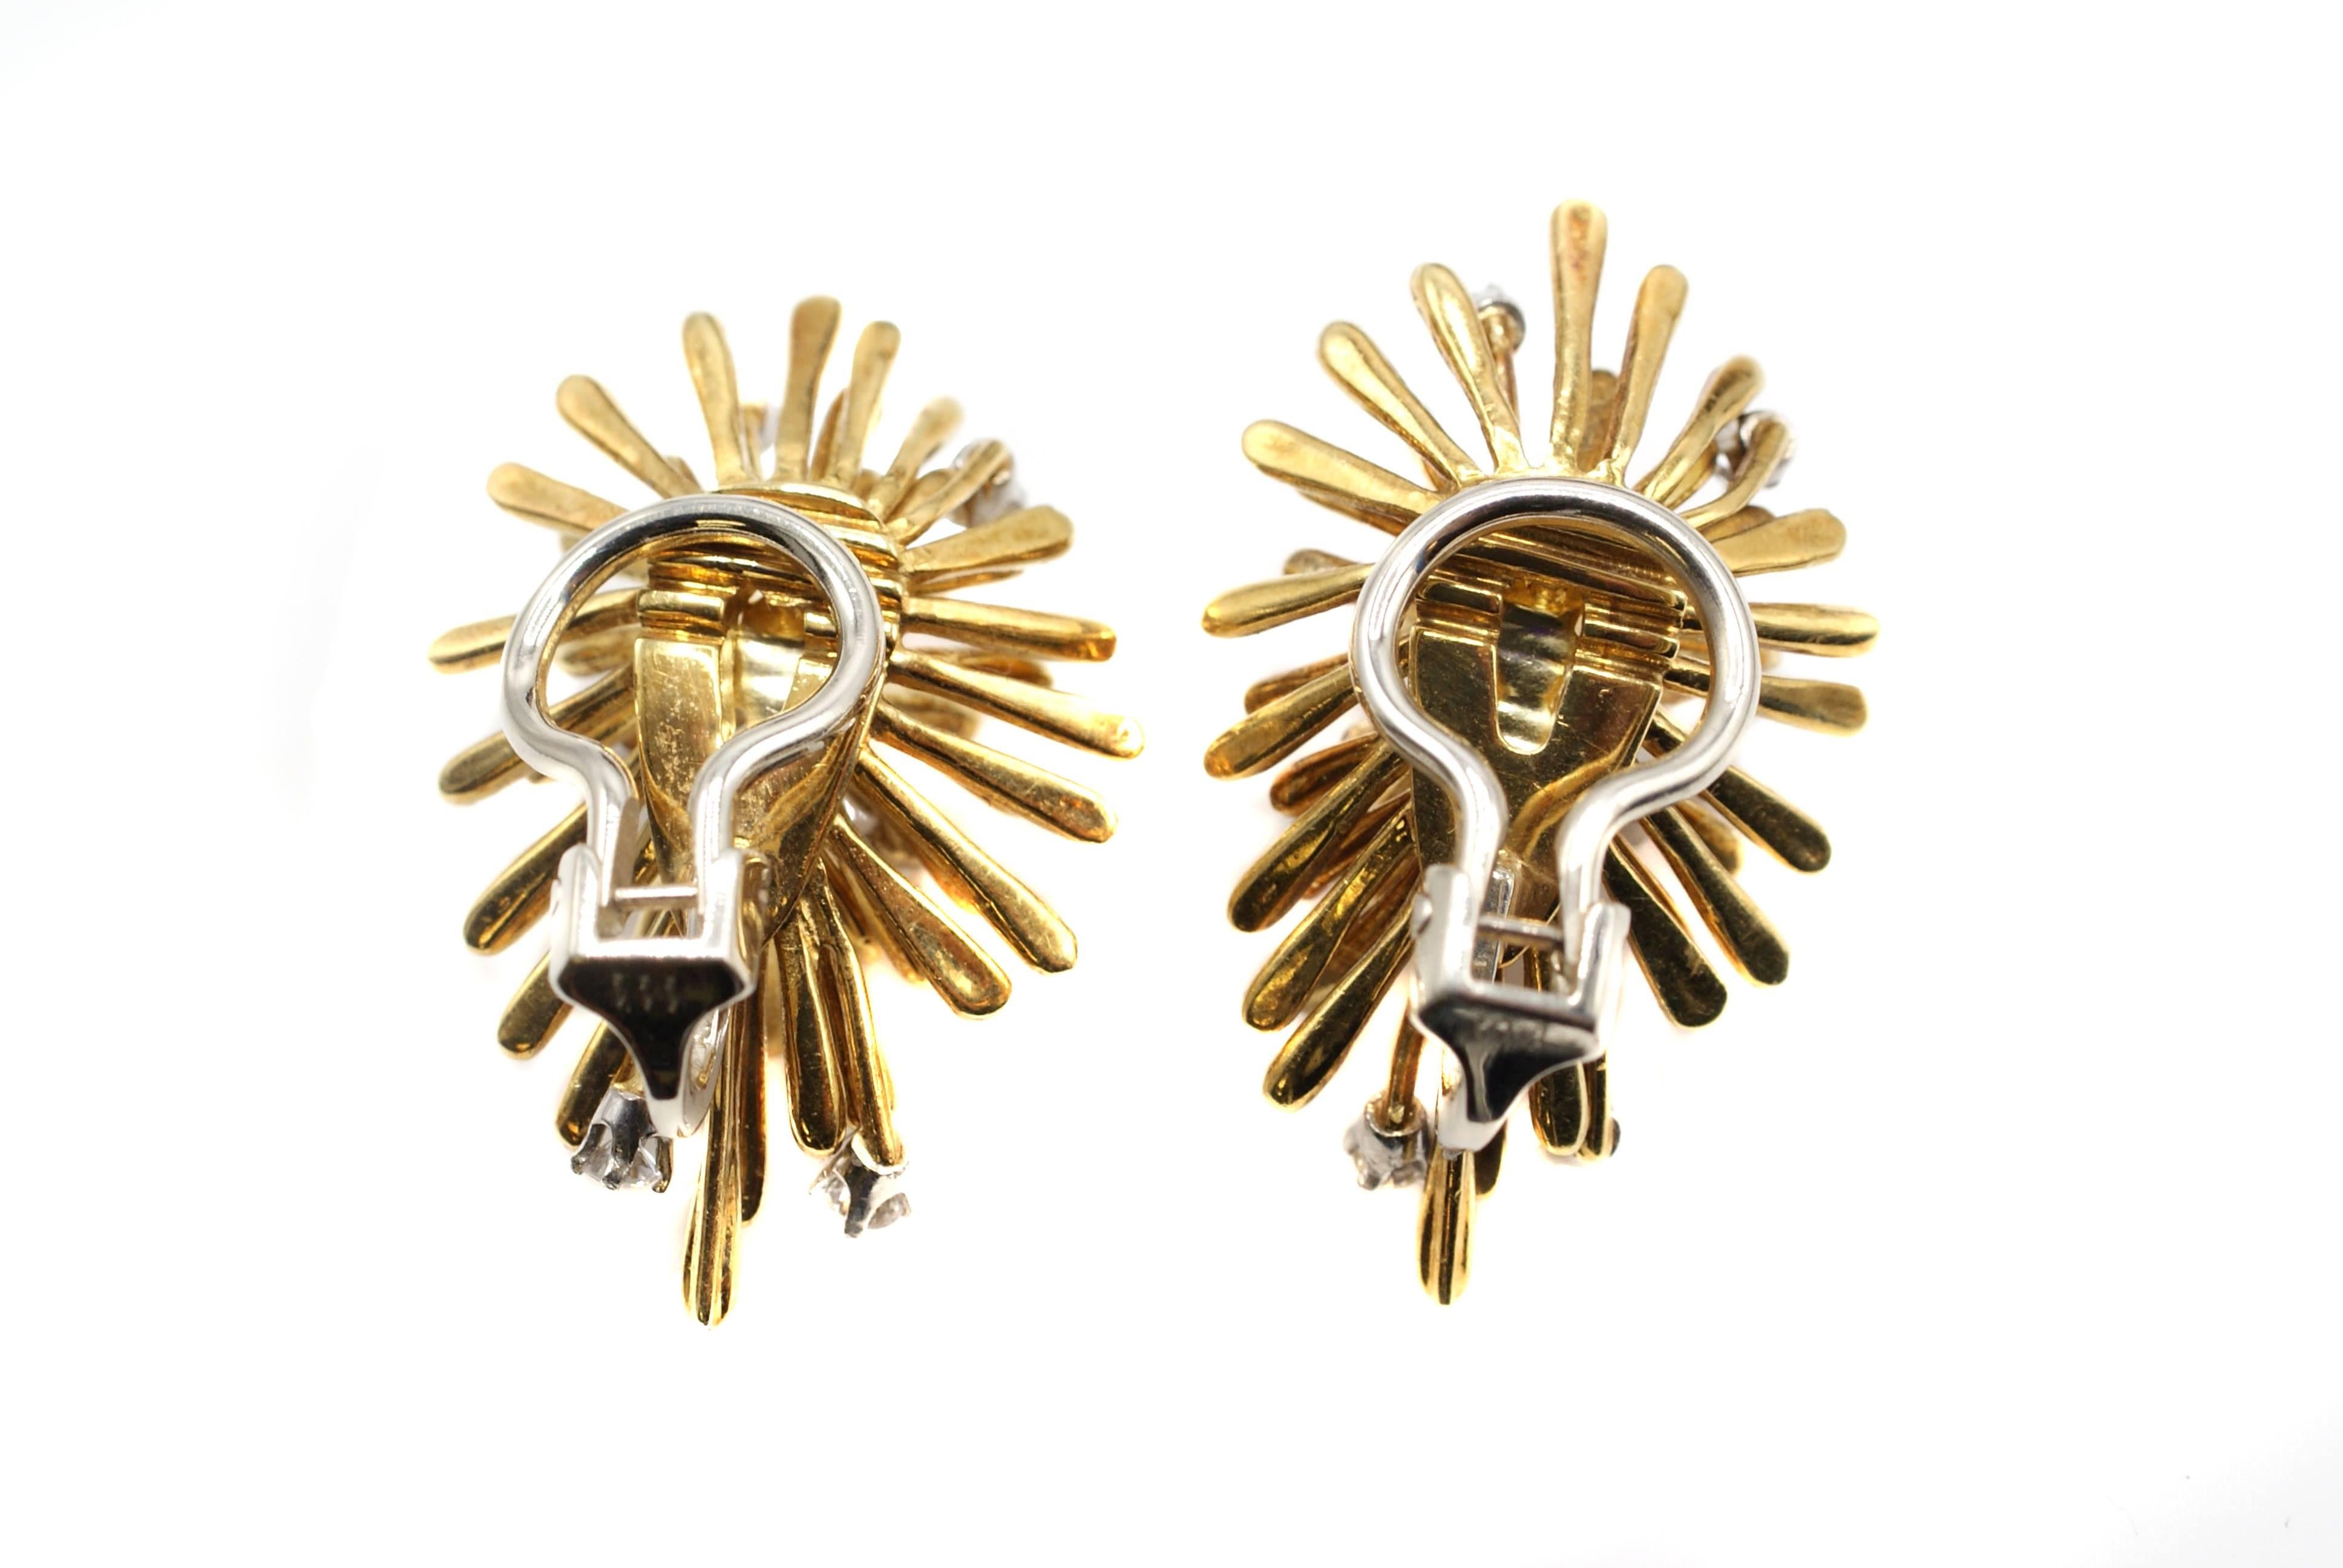 Unique chic 1960s ear clips hand crafted from 18 karat yellow gold. These abstract designed earrings resemble a starburst, with individual graduating polished tubes of gold, some of which are tipped with a bright white and sparkly round brilliant